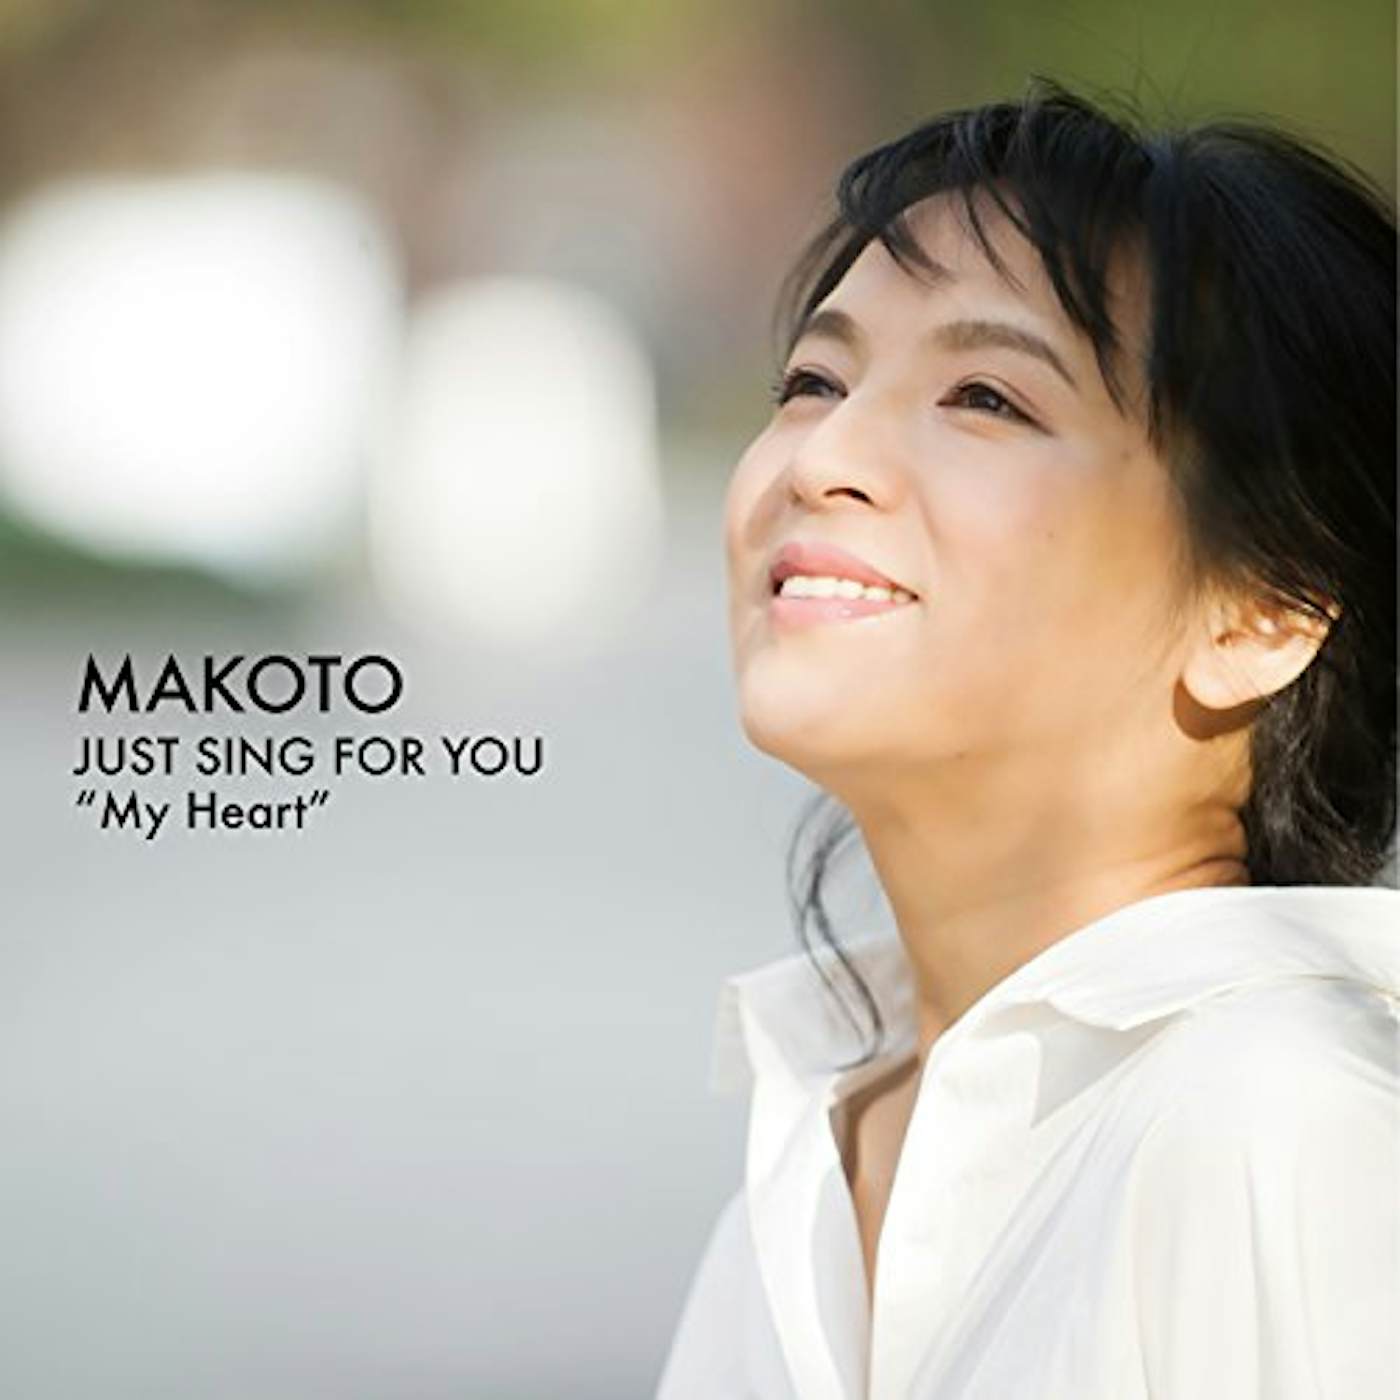 Makoto JUST SING FOR YOU VOL 1: MY HEART CD